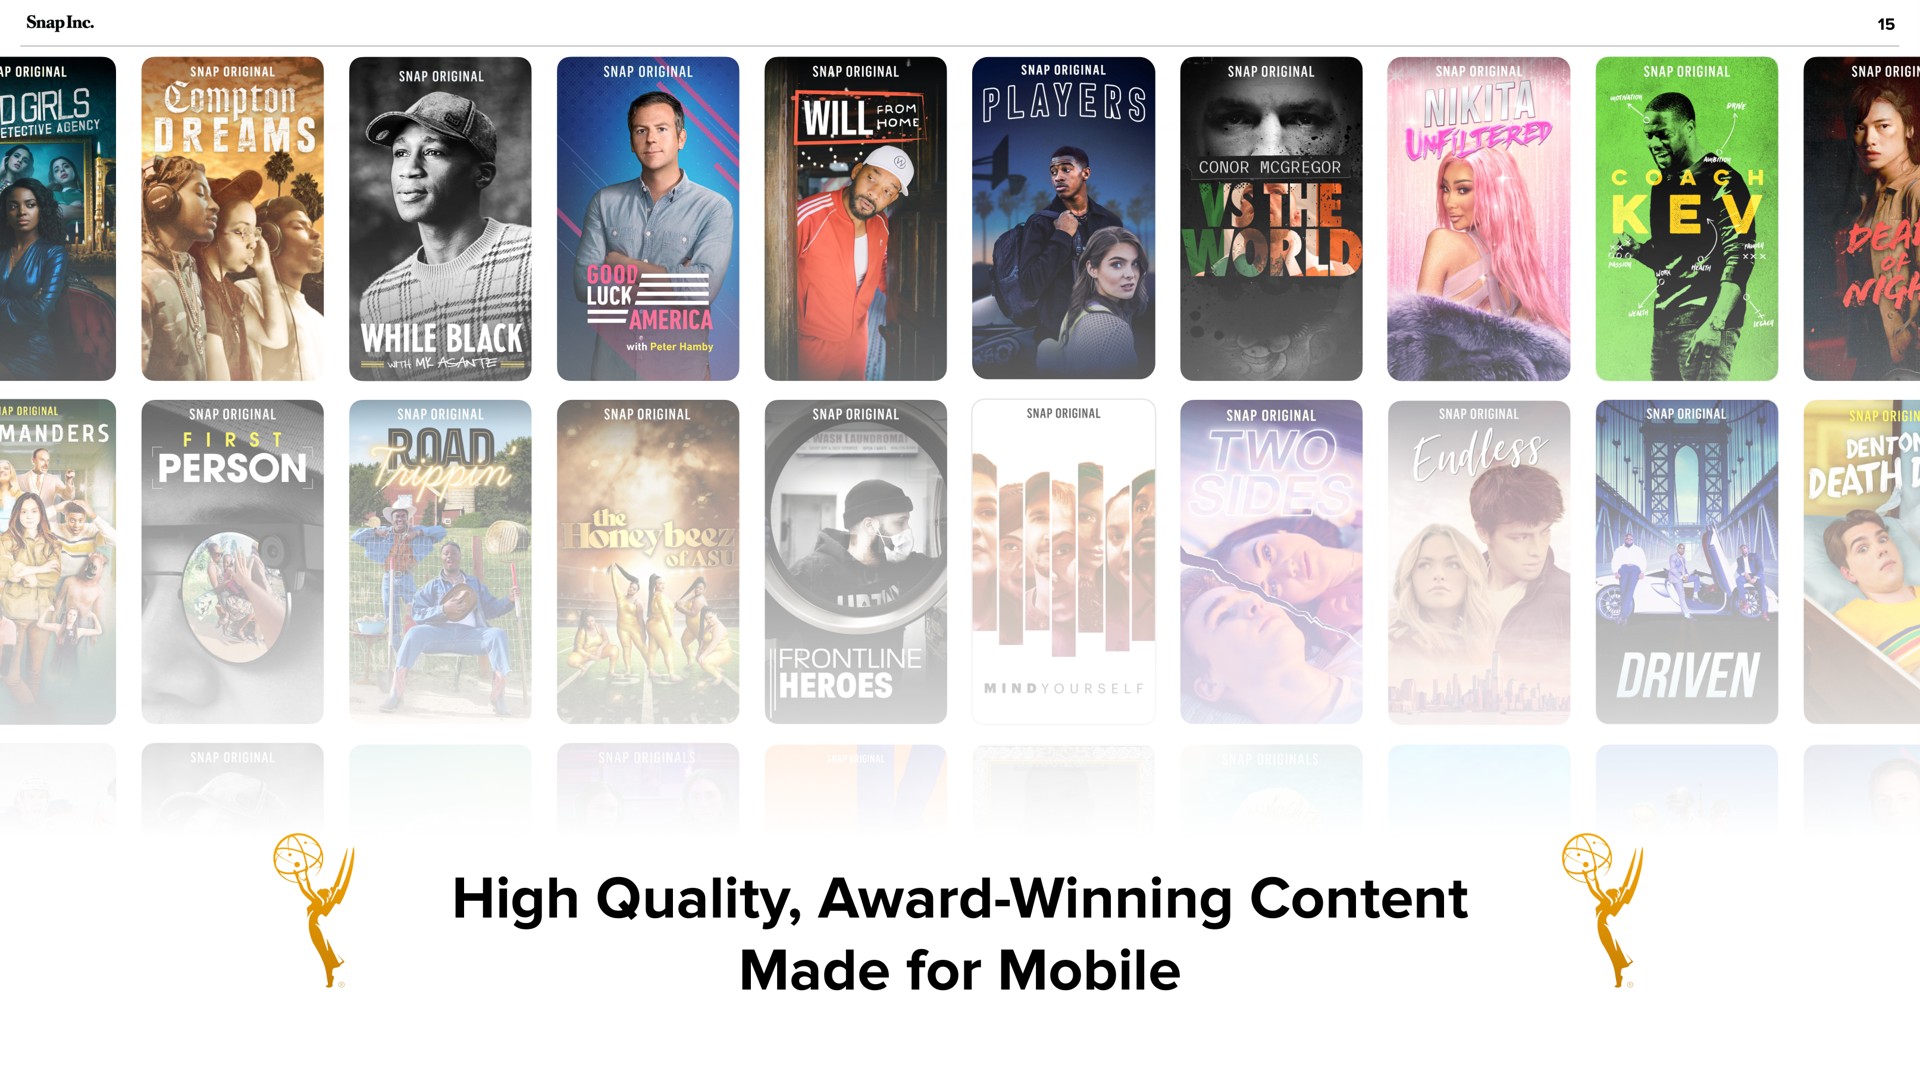 high quality award winning content made for mobile | Snap Inc